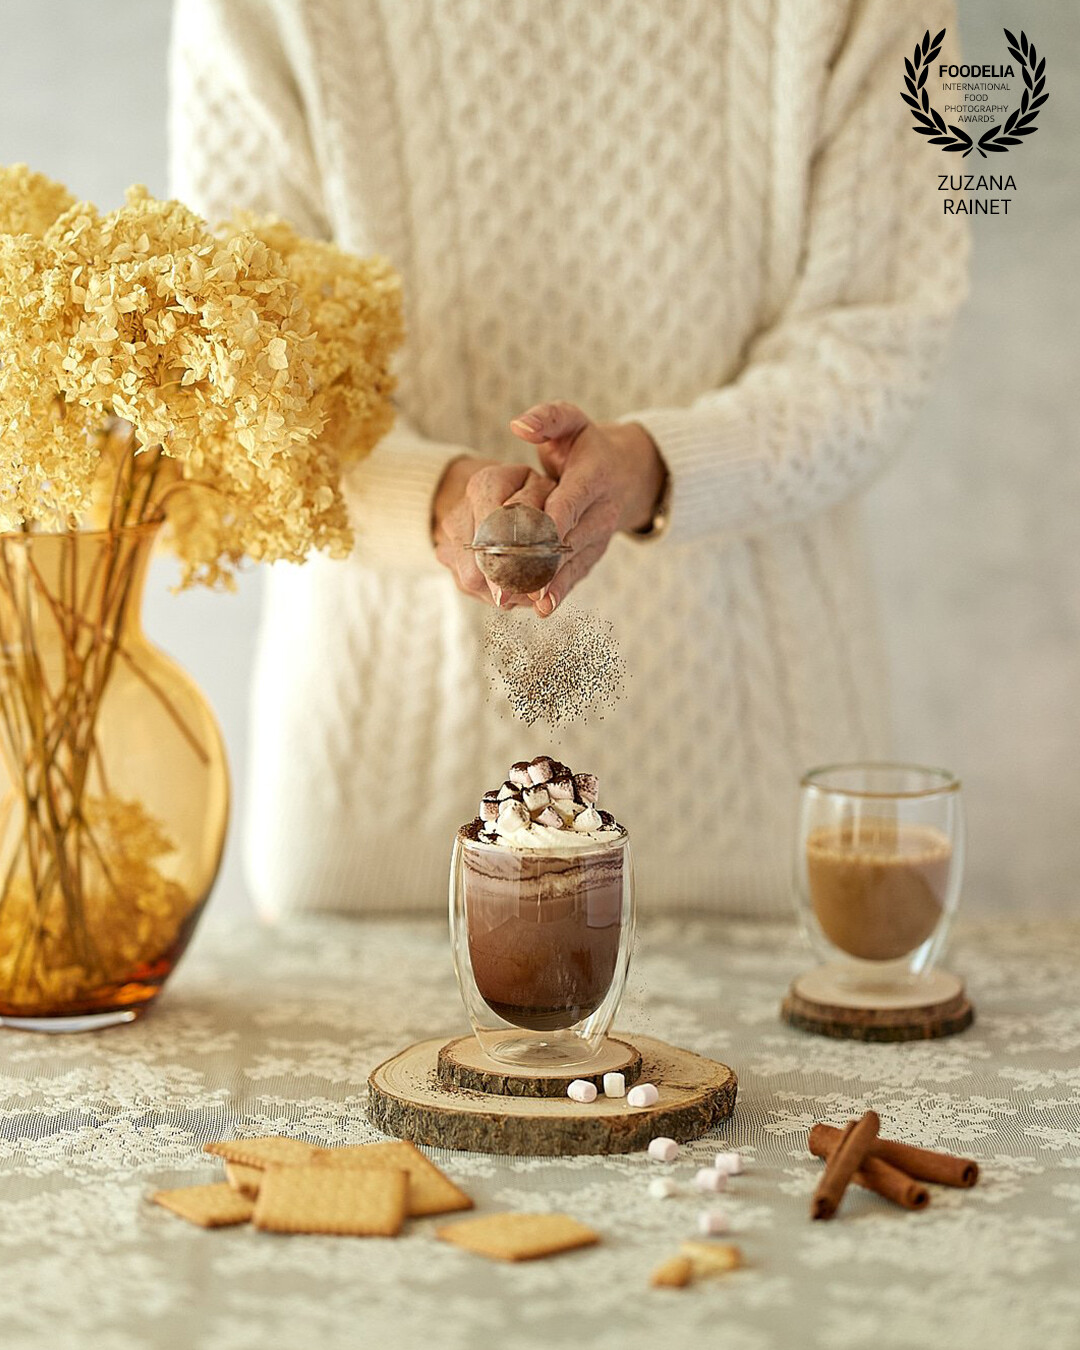 In this photoshoot I wanted to capture the frozen movement of cocoa powder falling on a hot chocolate served with cream and marshmallows. The image should evoke the cosy winter atmosphere. Shot with natural light.